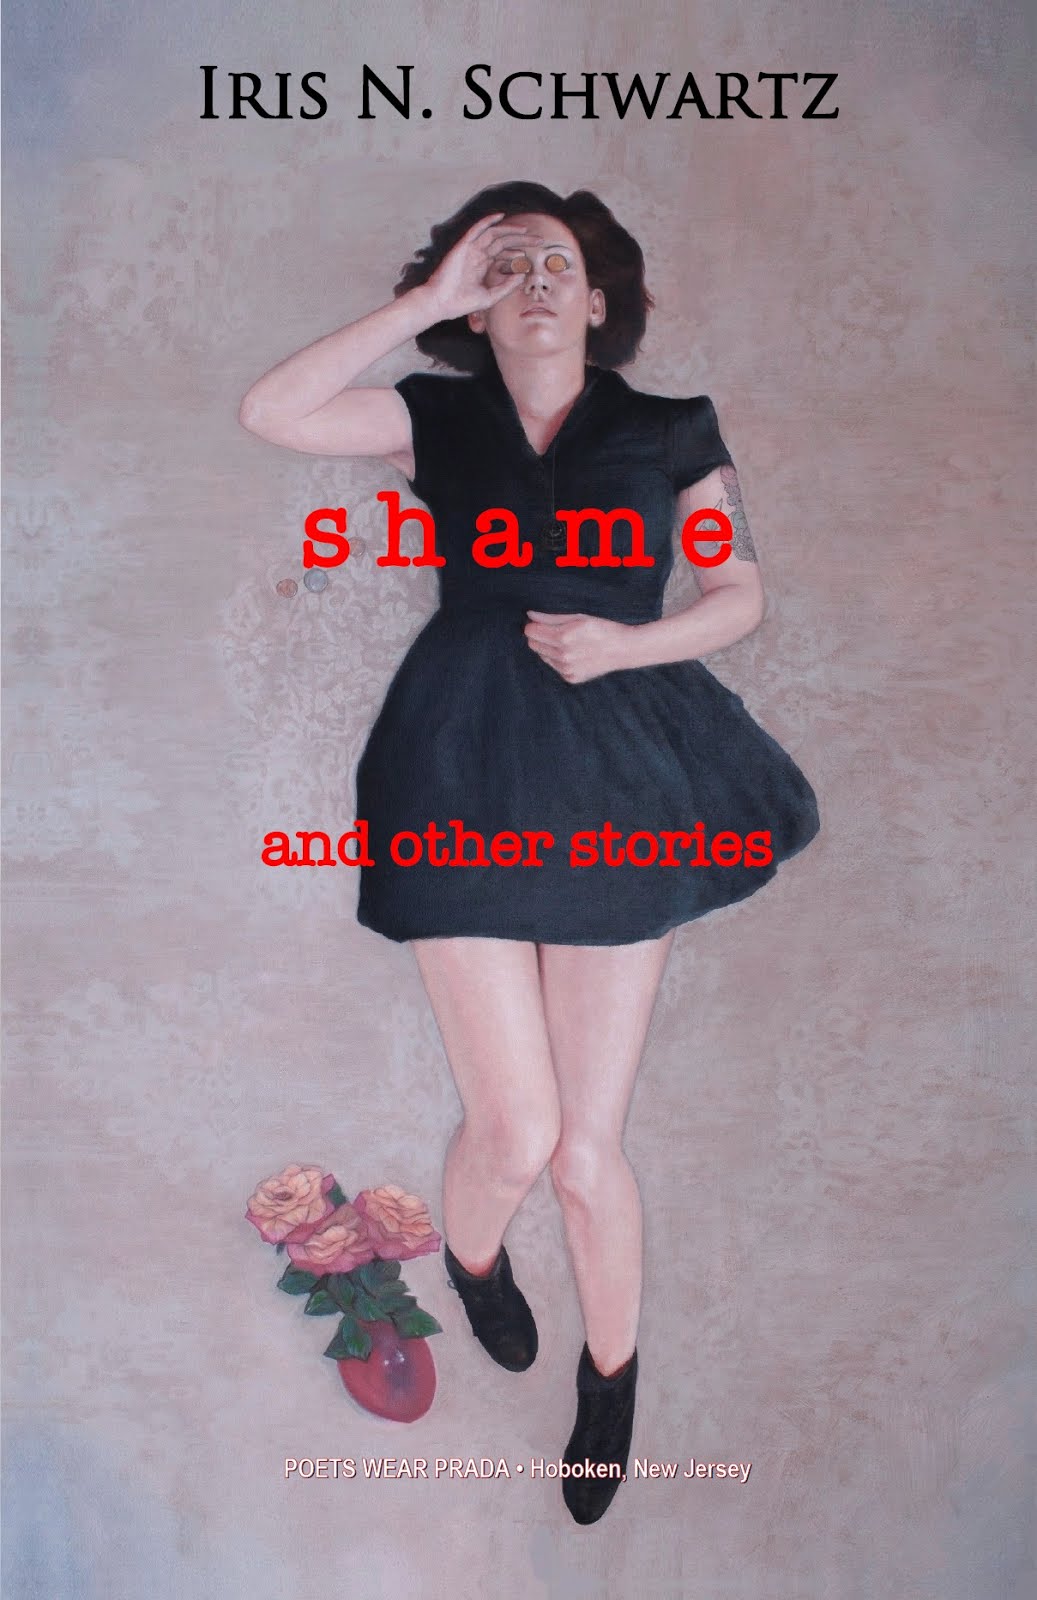 April Reads: More Short Fiction by Iris N. Schwartz; SHAME: And Other Stories